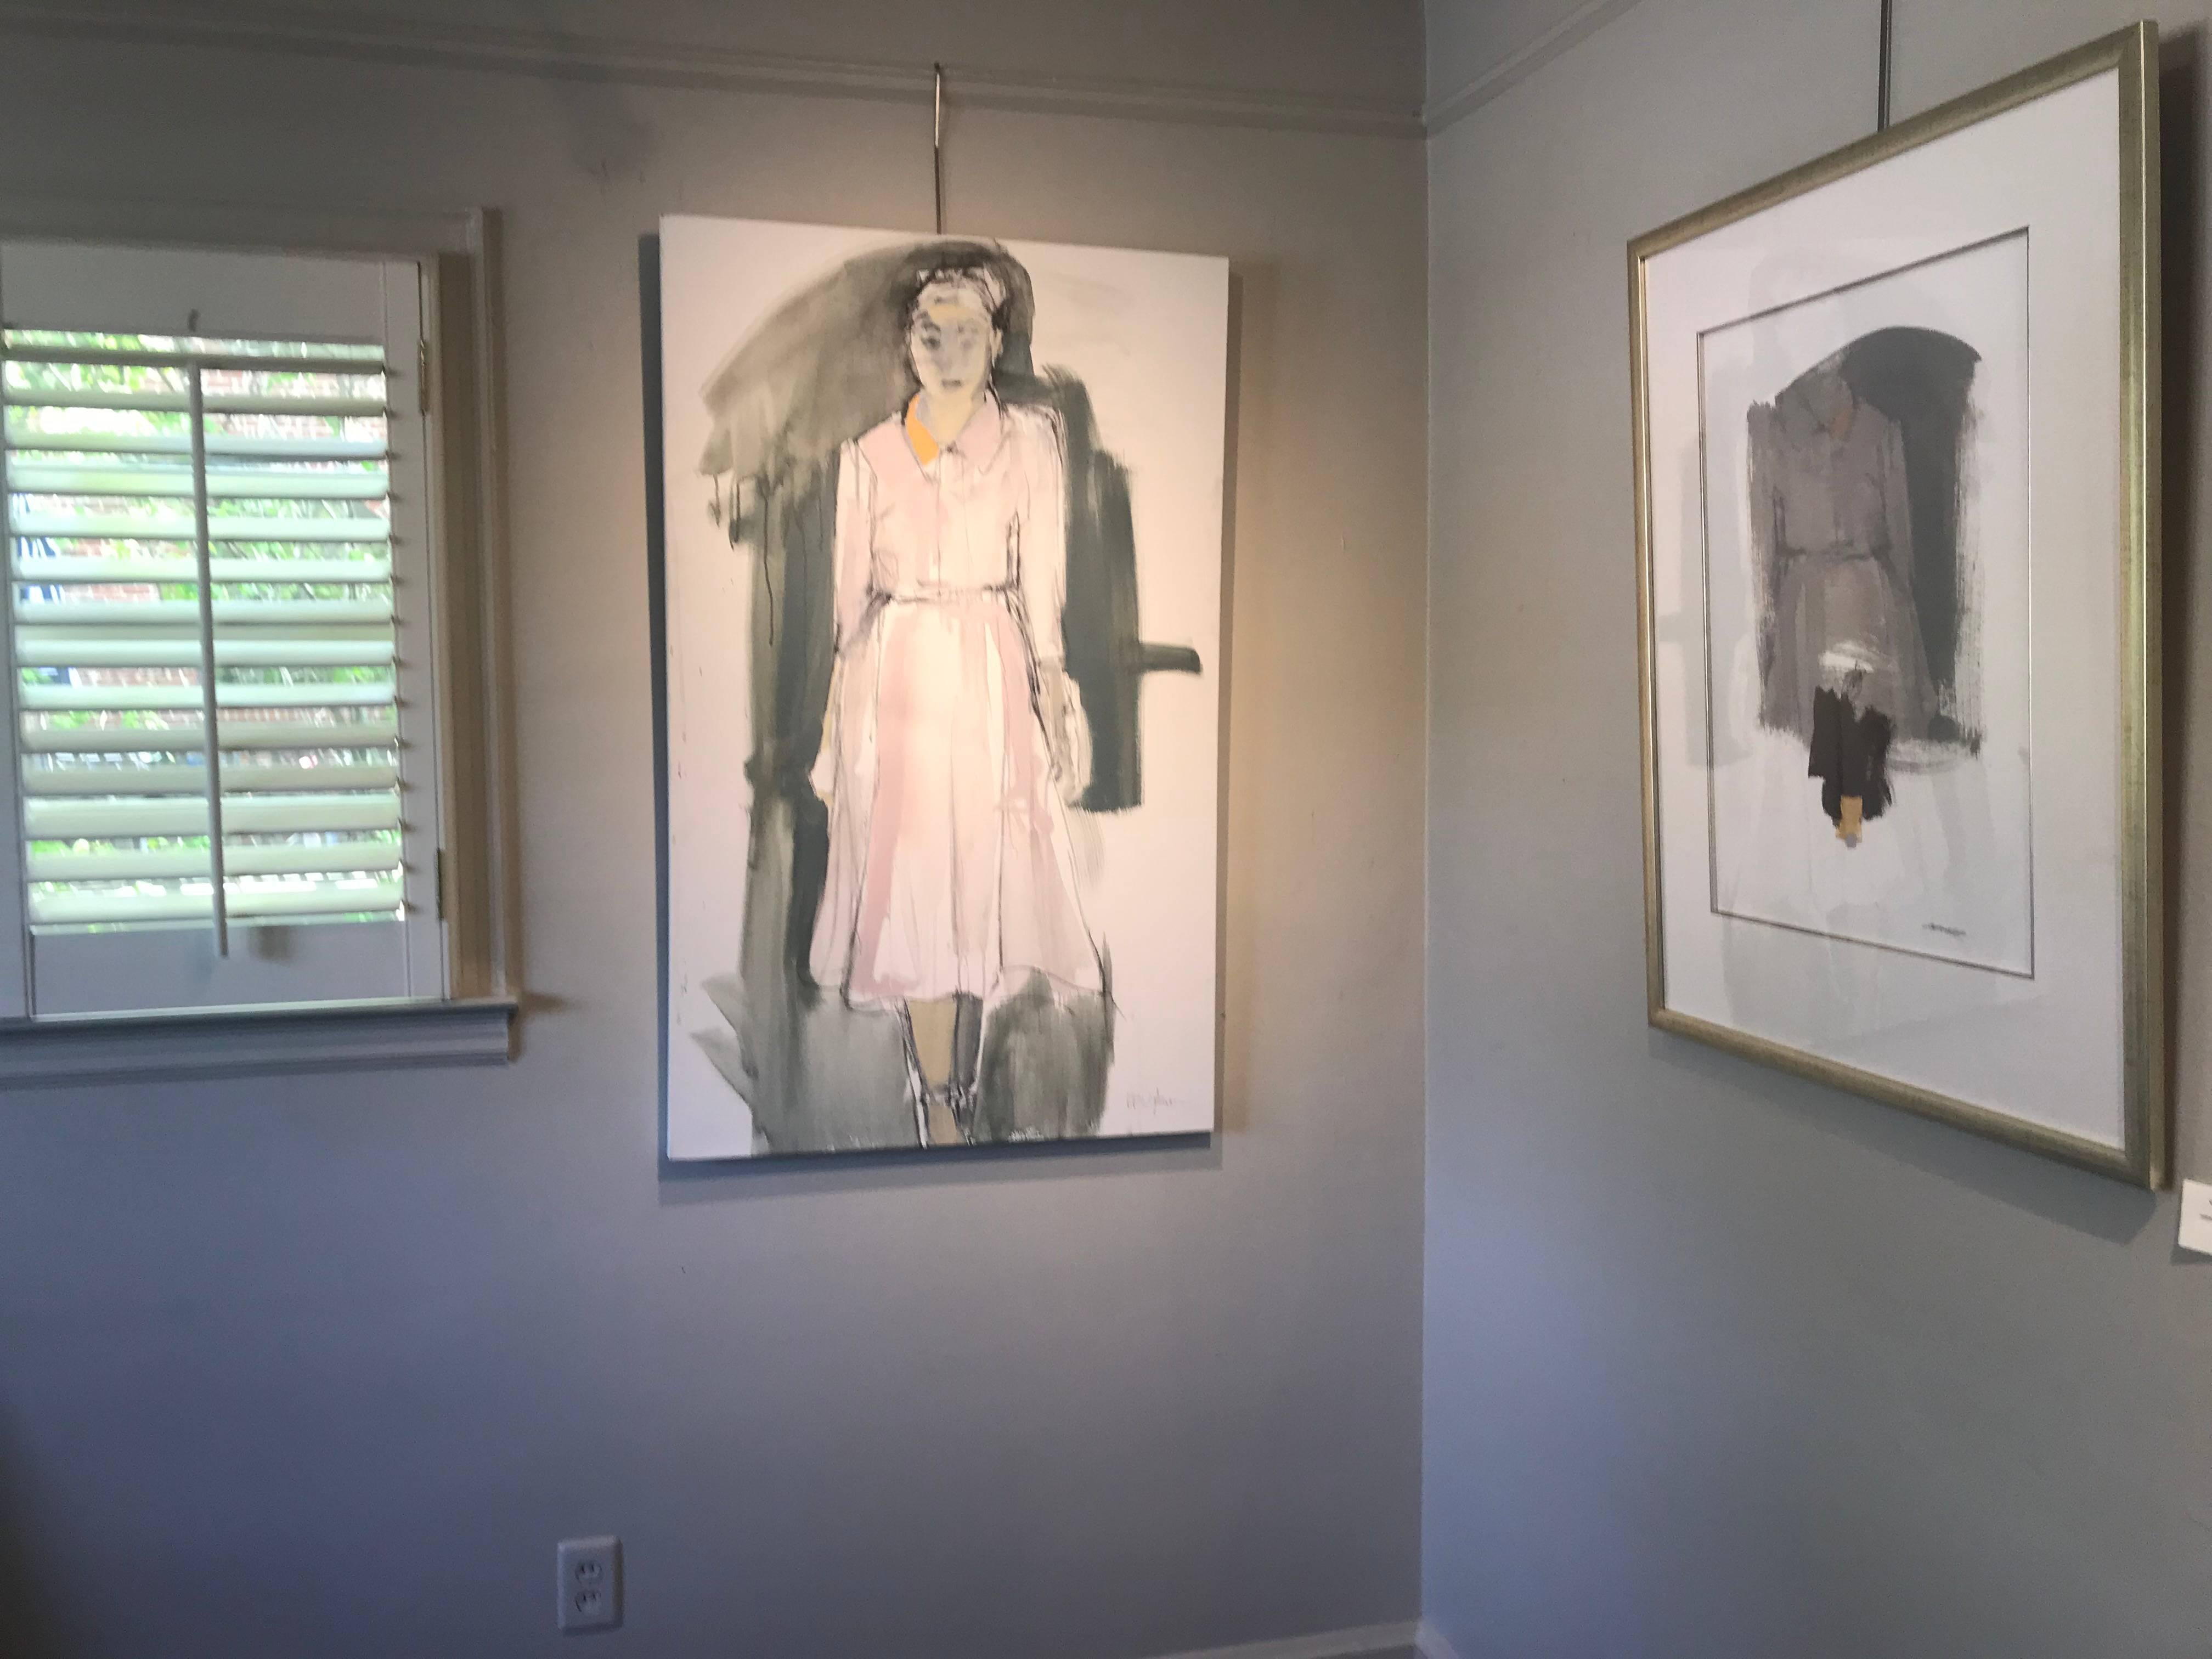 'All Her Own' is a contemporary figurative mixed media on canvas painting created by American artist Kelley Ogburn in 2018. This vertical format features a loose depiction of a woman, walking towards us. Mysterious, the painting exudes an aura of